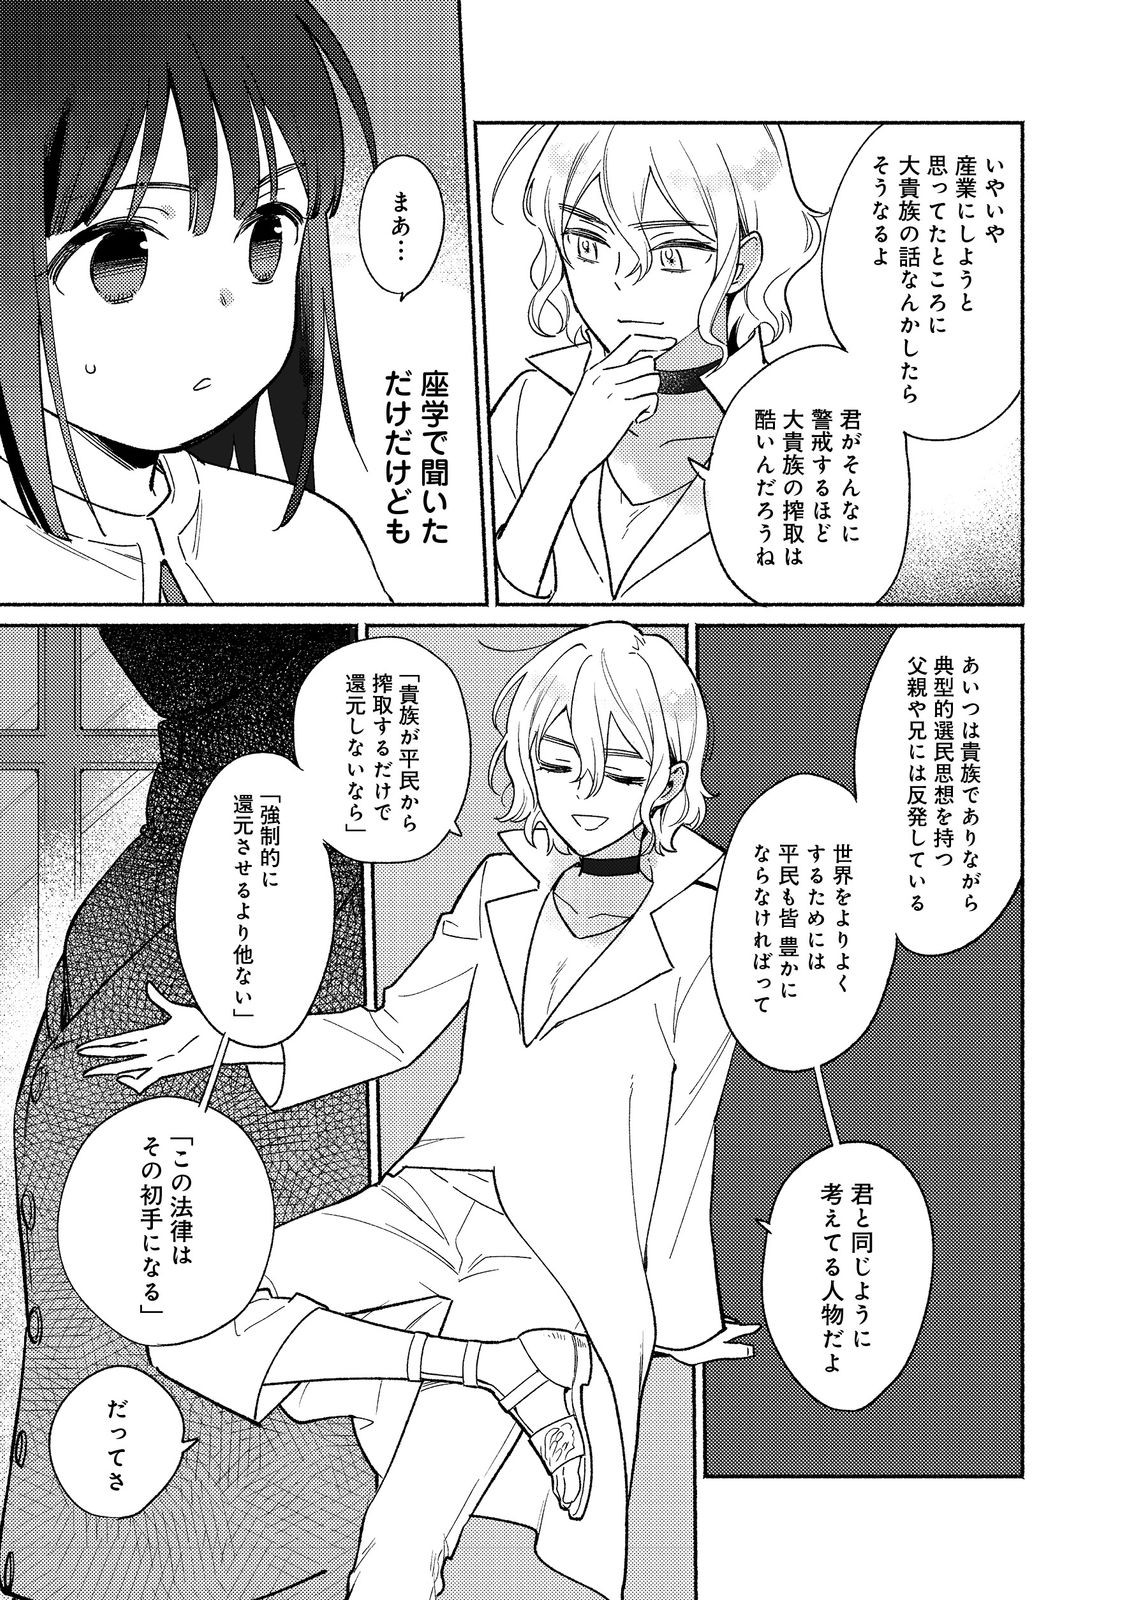 I’m the White Pig Nobleman 第19.2話 - Page 5